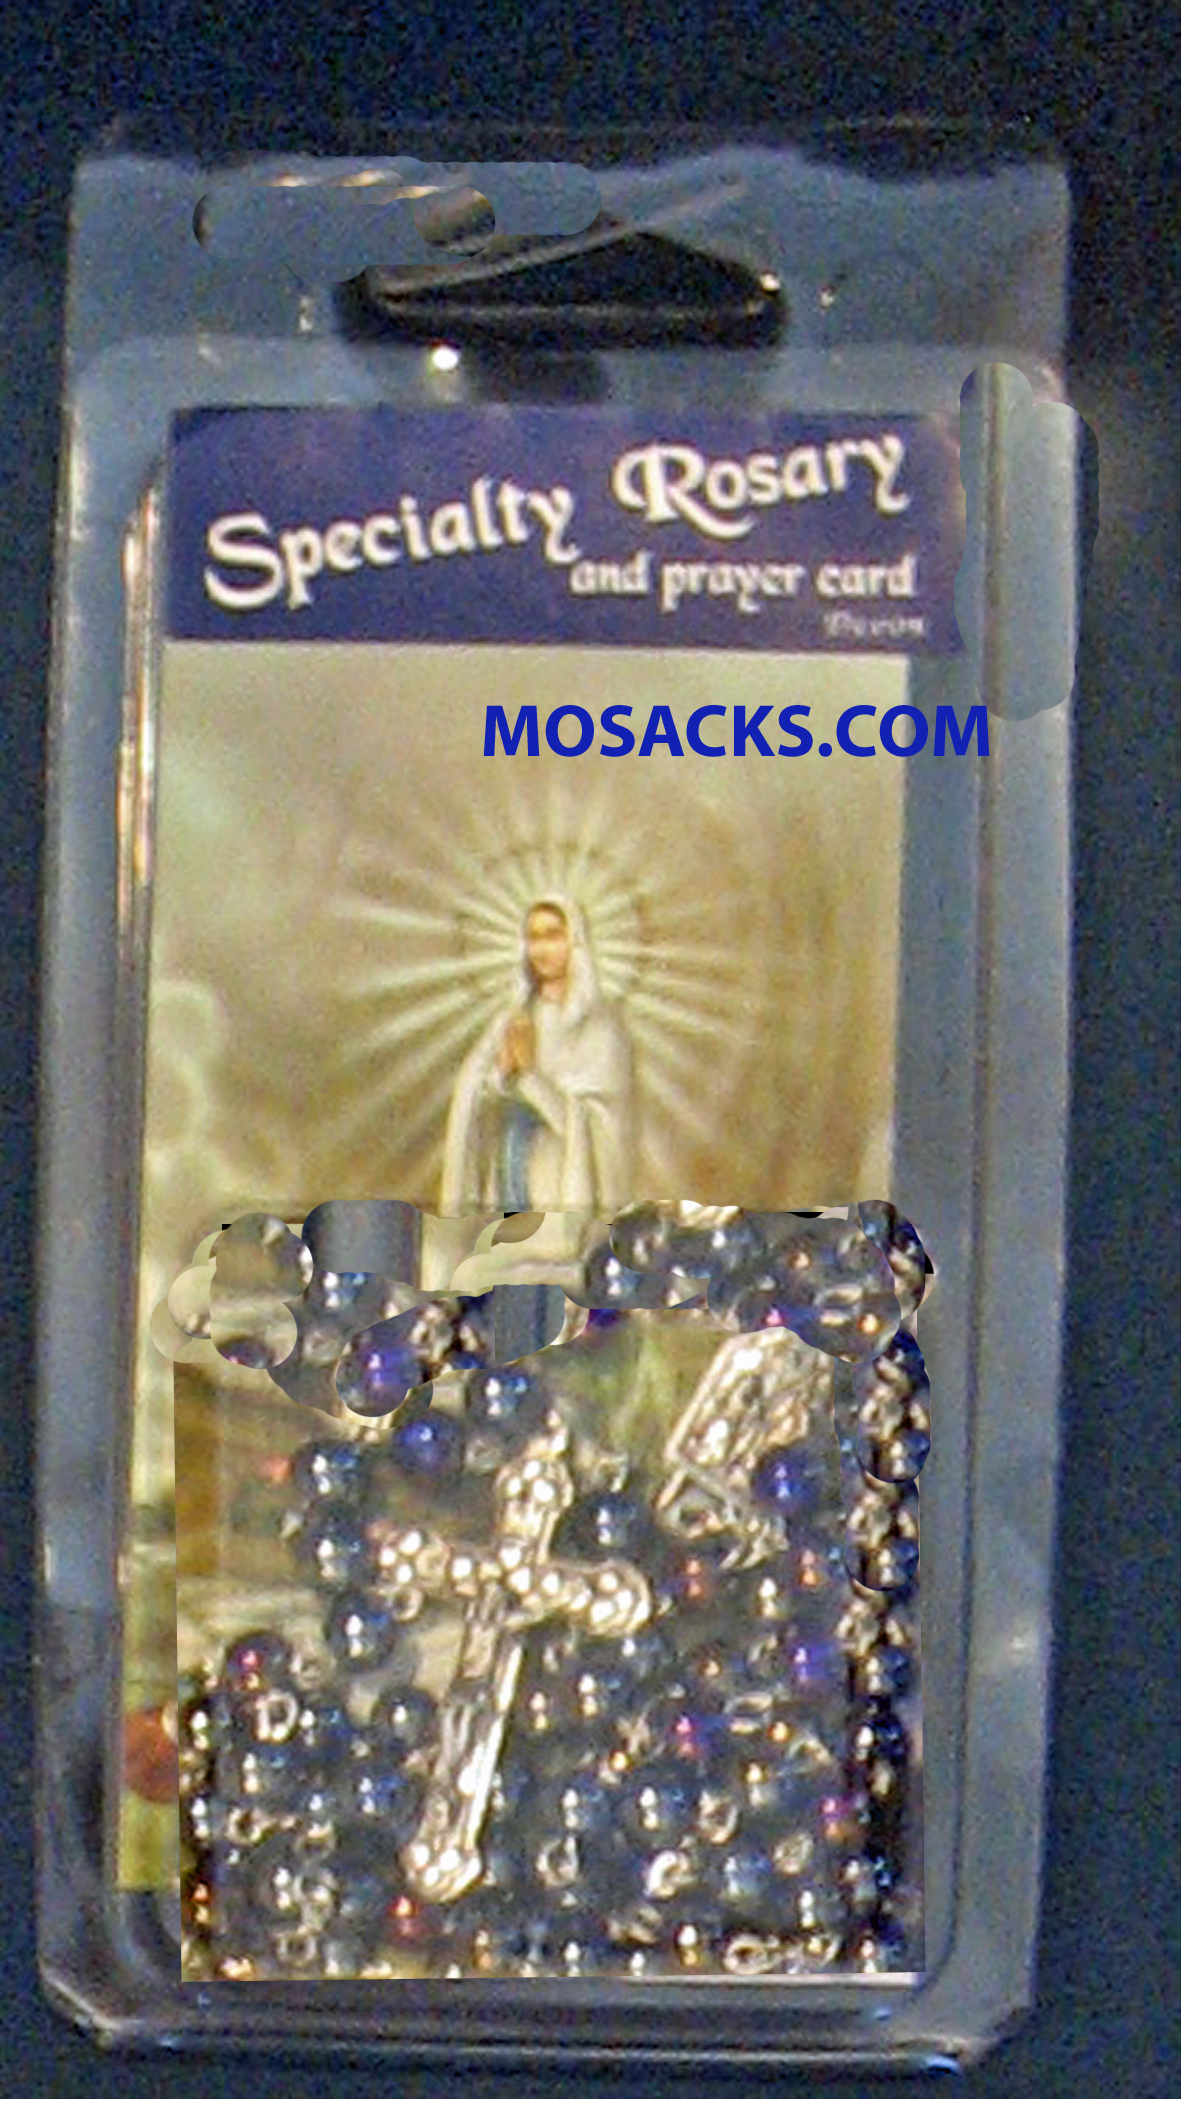 Specialty Rosary Our Lady Of Lourdes Blue Rosary with water from Lourdes in the joiner, and O.L. Lourdes Prayer Card 64-967/LOU/C1